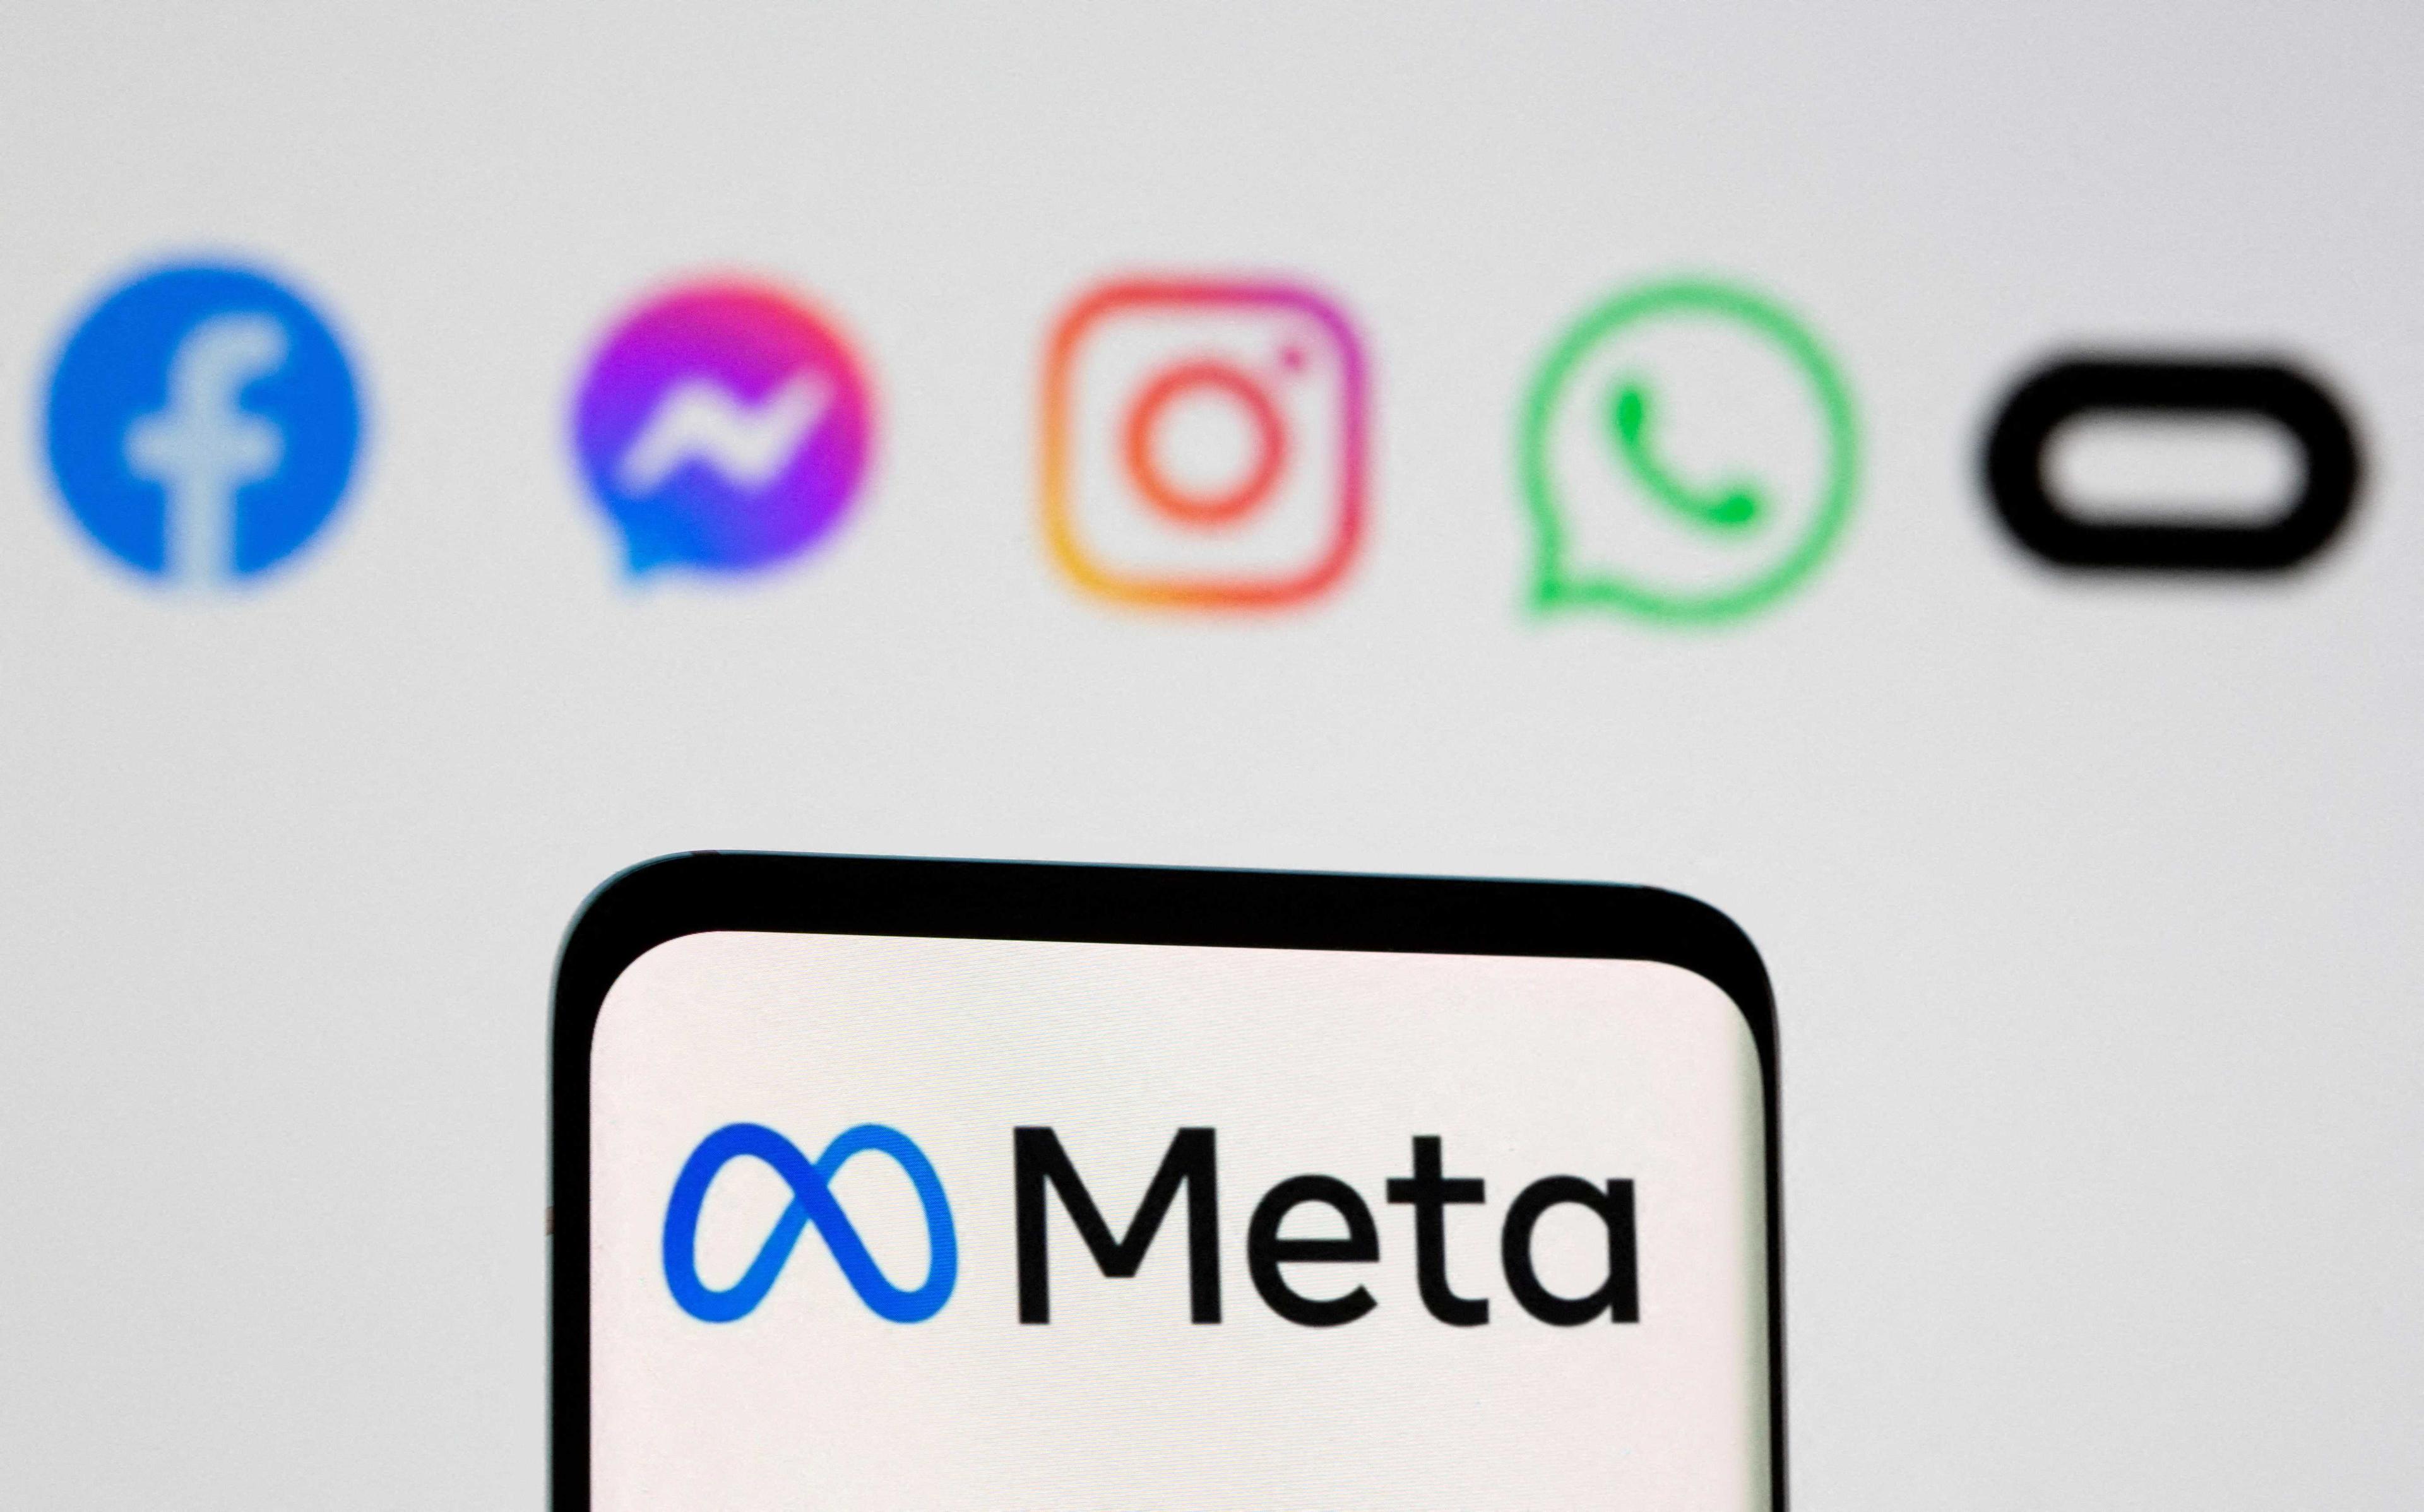 The Meta logo is seen on smartphone in front of displayed logos of Facebook, Messenger, Instagram, WhatsApp, Oculus in this illustration picture taken Oct 28, 2021. Photo: Reuters